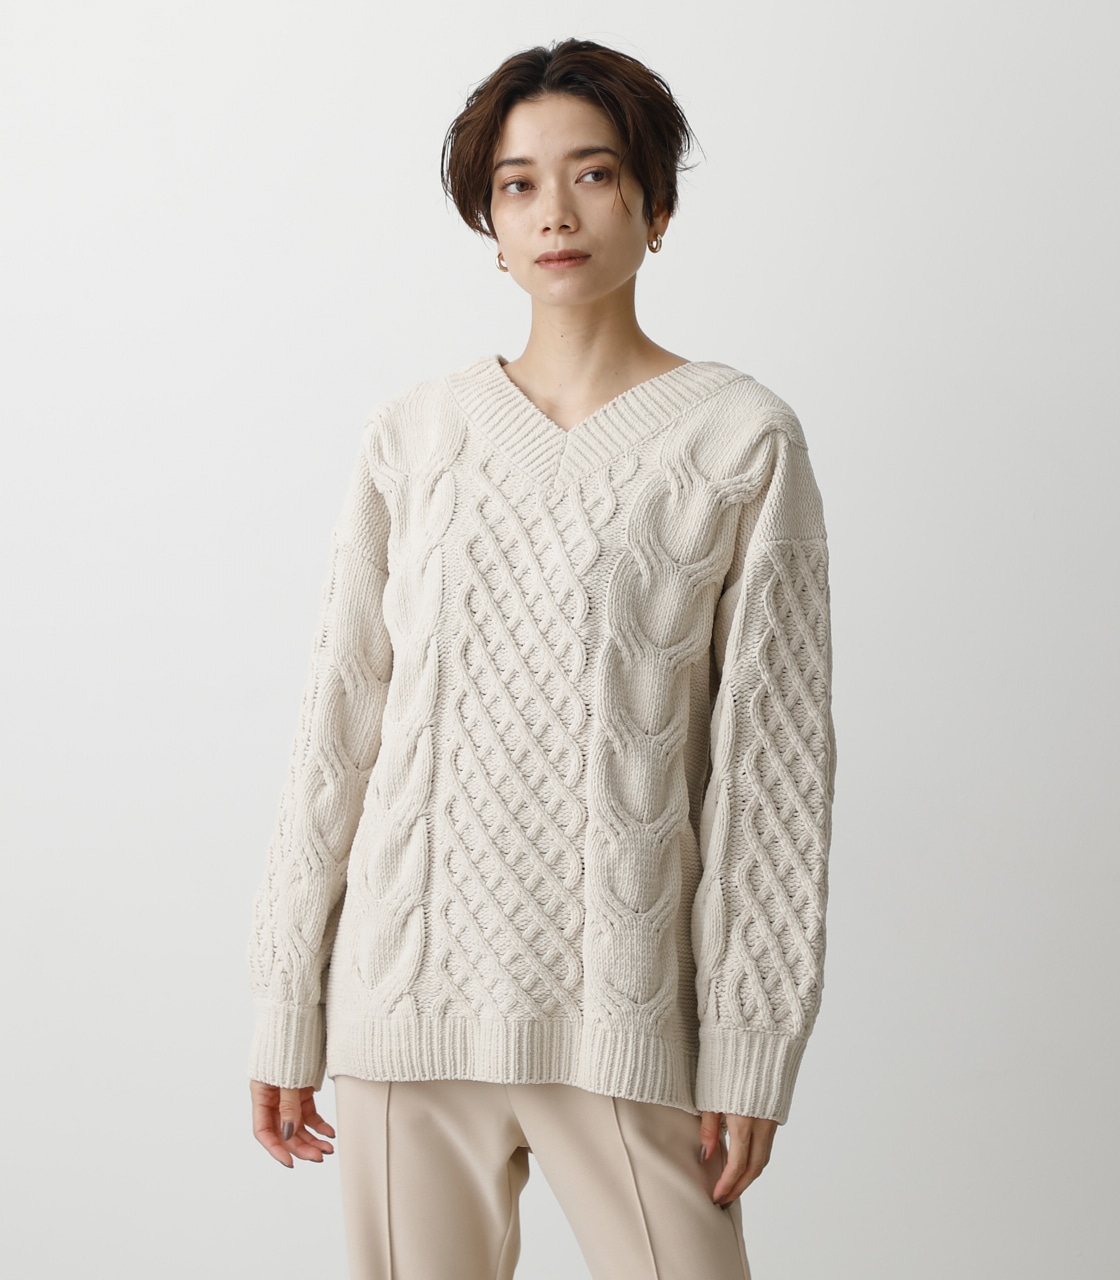 CHENILLE CABLE V/N KNIT TOPS/シェニールケーブルVネックニットトップス 詳細画像 IVOY 5